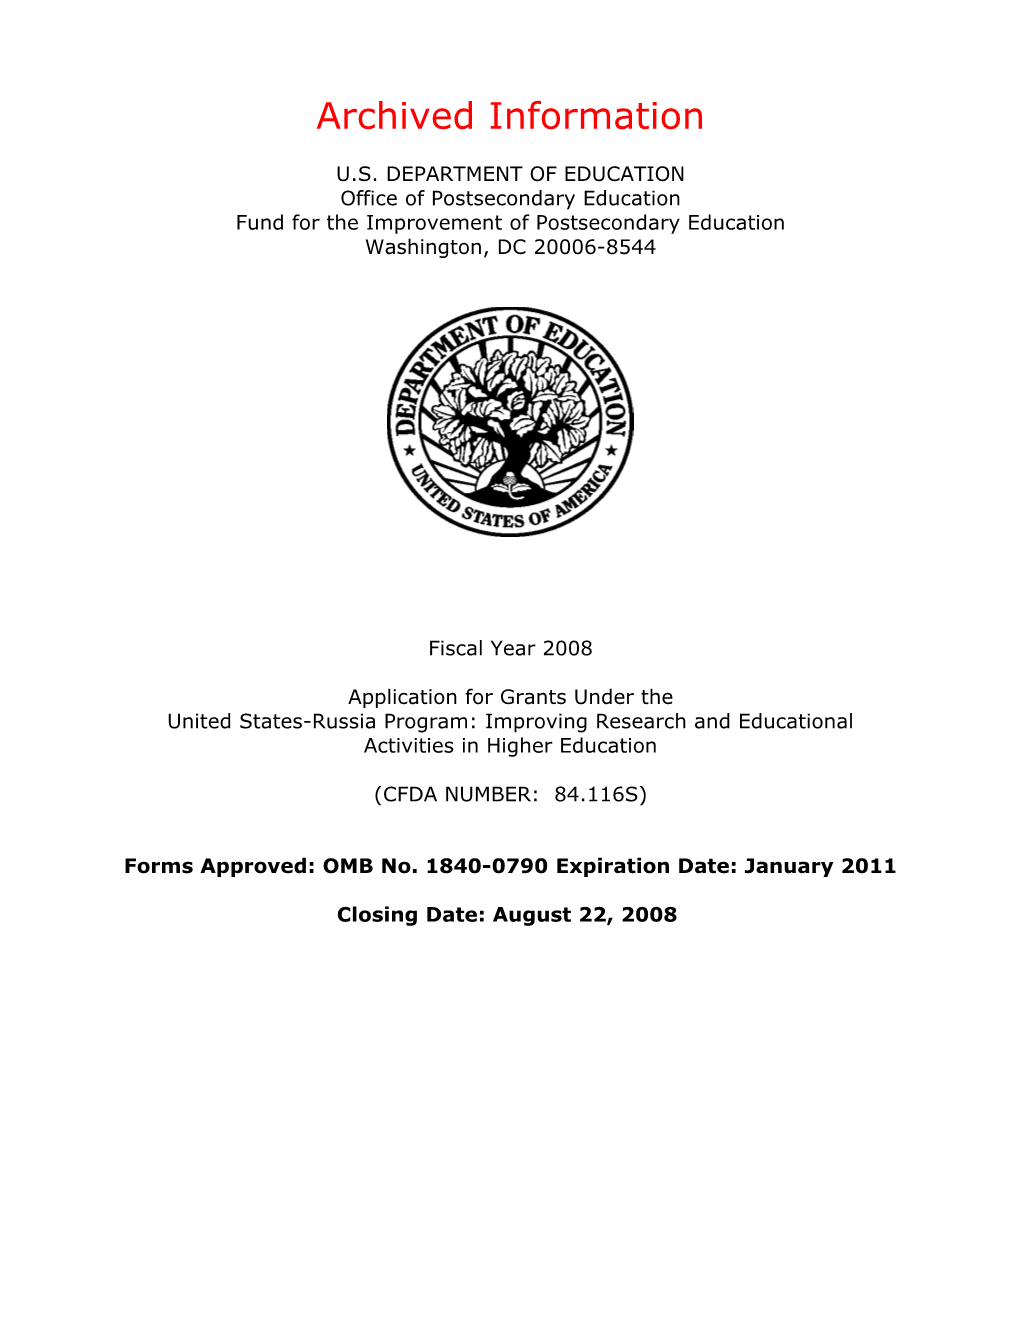 Archived: United States-Russia Program FY 2008 Application Guidelines (MS Word)